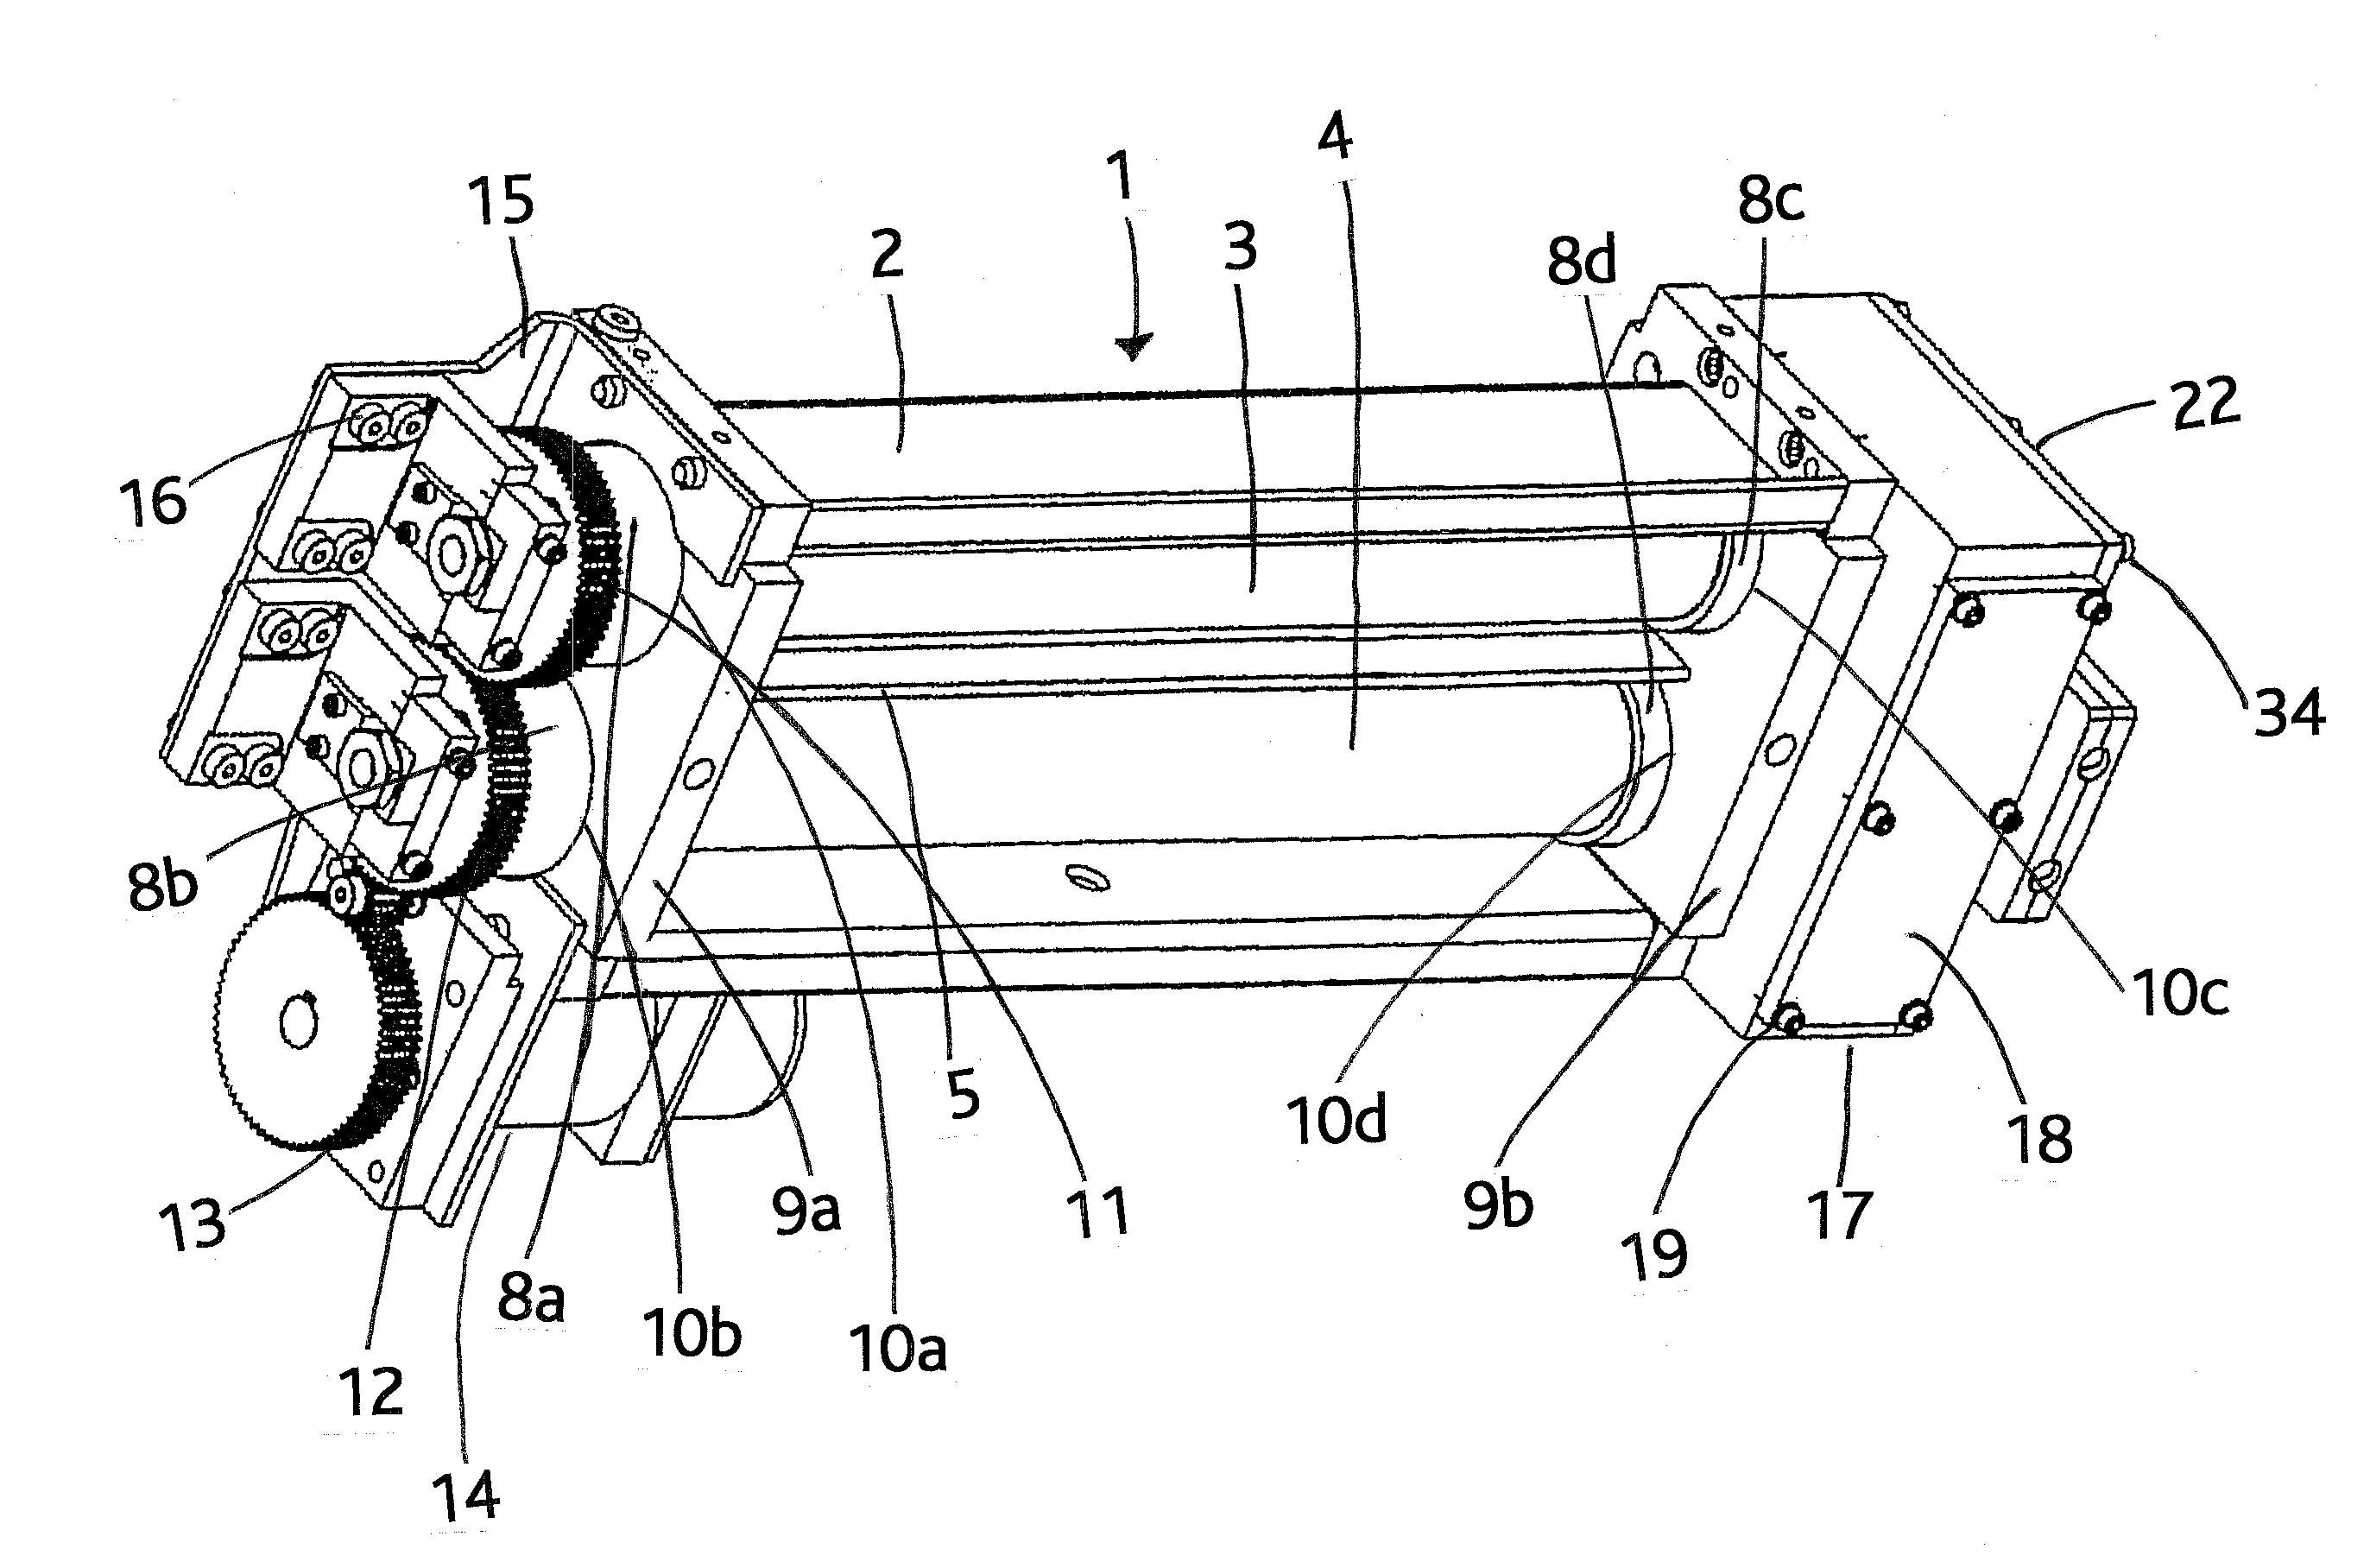 Apparatus for treating substrates